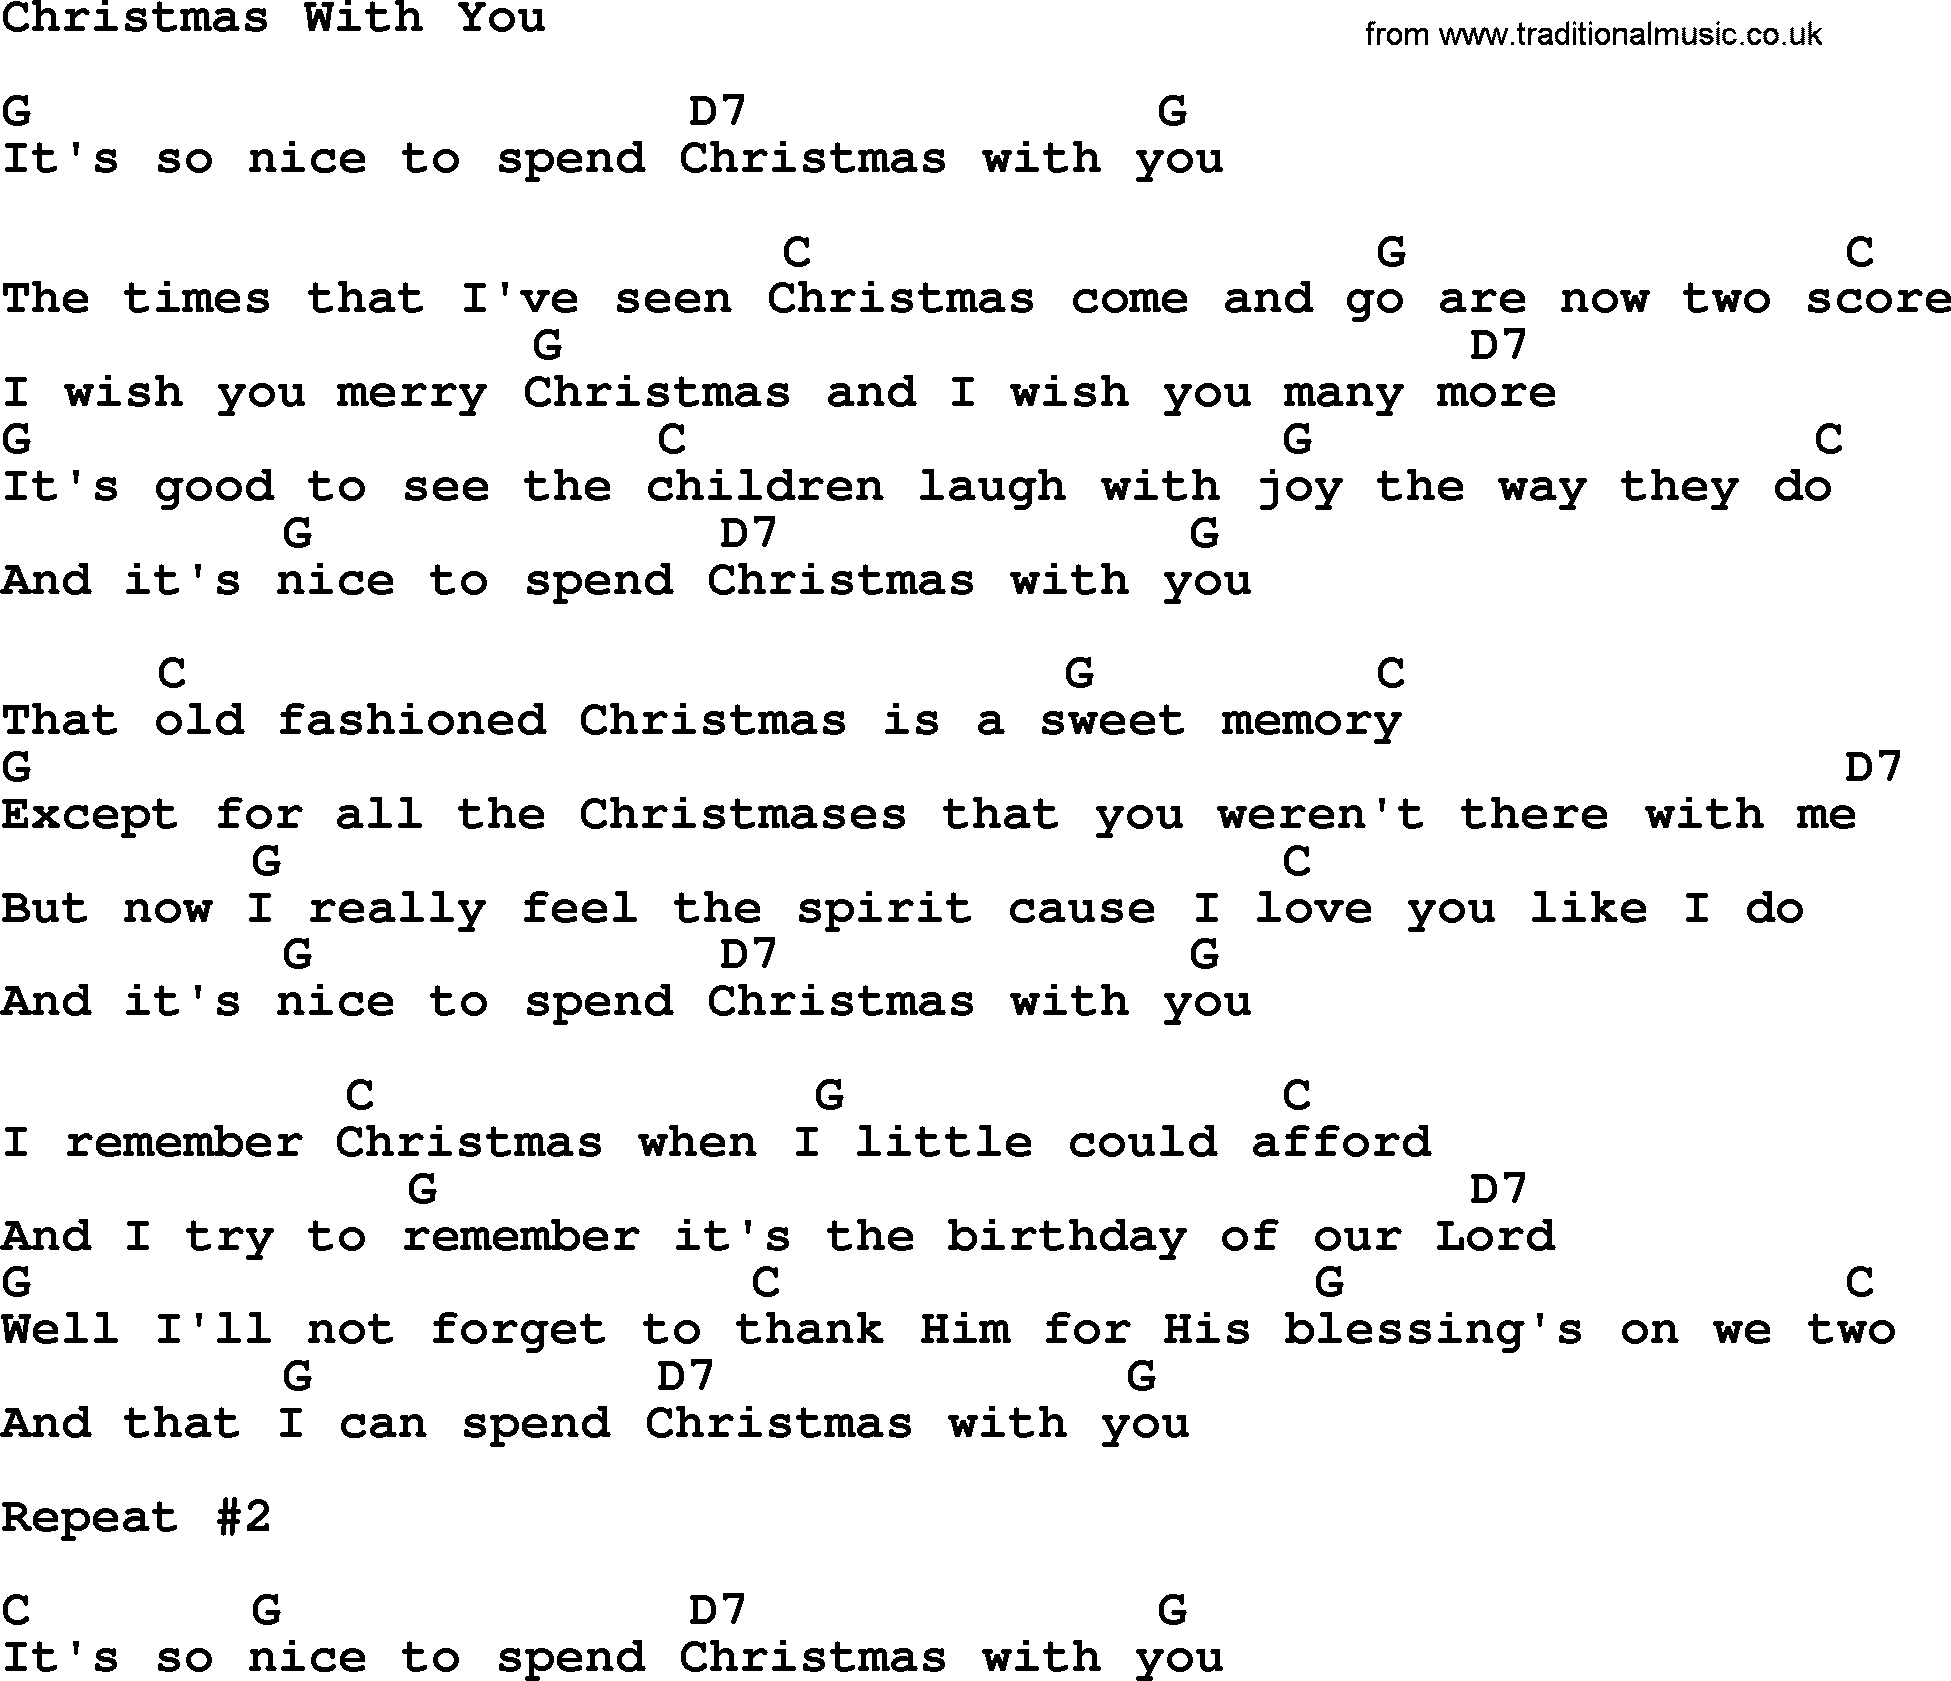 Johnny Cash song Christmas With You, lyrics and chords